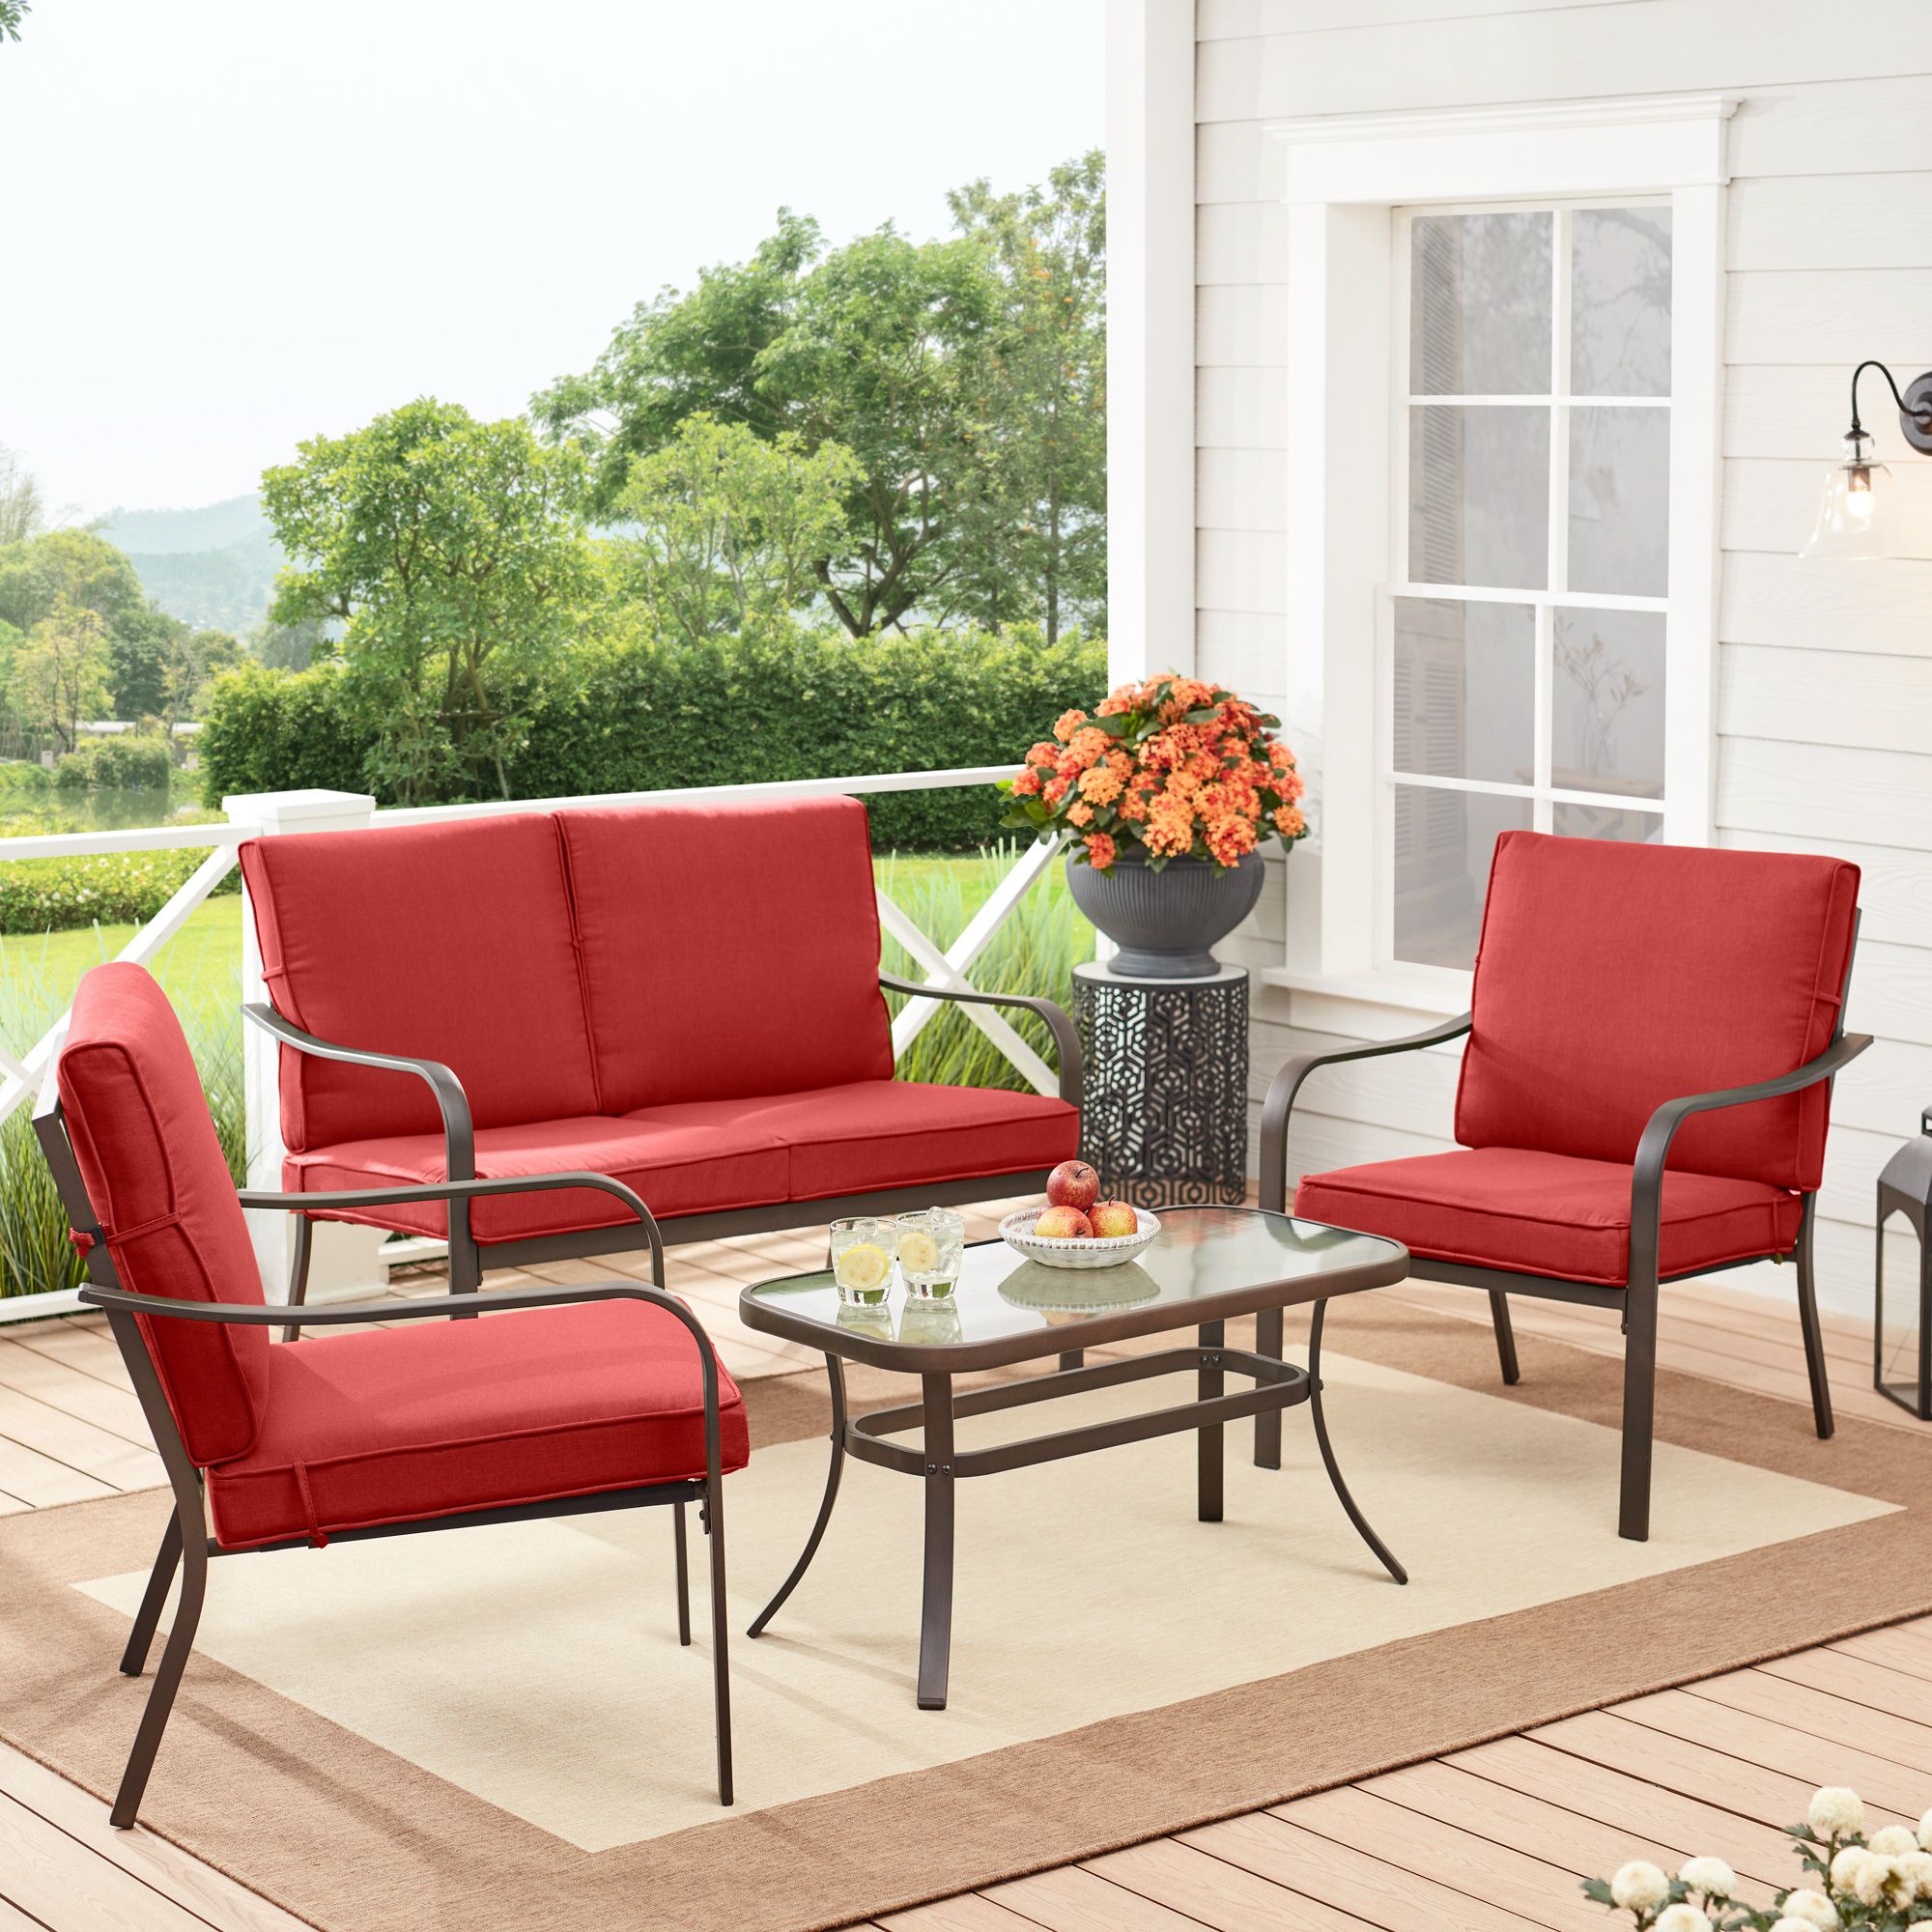 Most Recent 4 Piece Gray Outdoor Patio Seating Sets Throughout Mainstays Stanton 4 Piece Outdoor Patio Conversation Set, Red – Walmart (View 9 of 15)